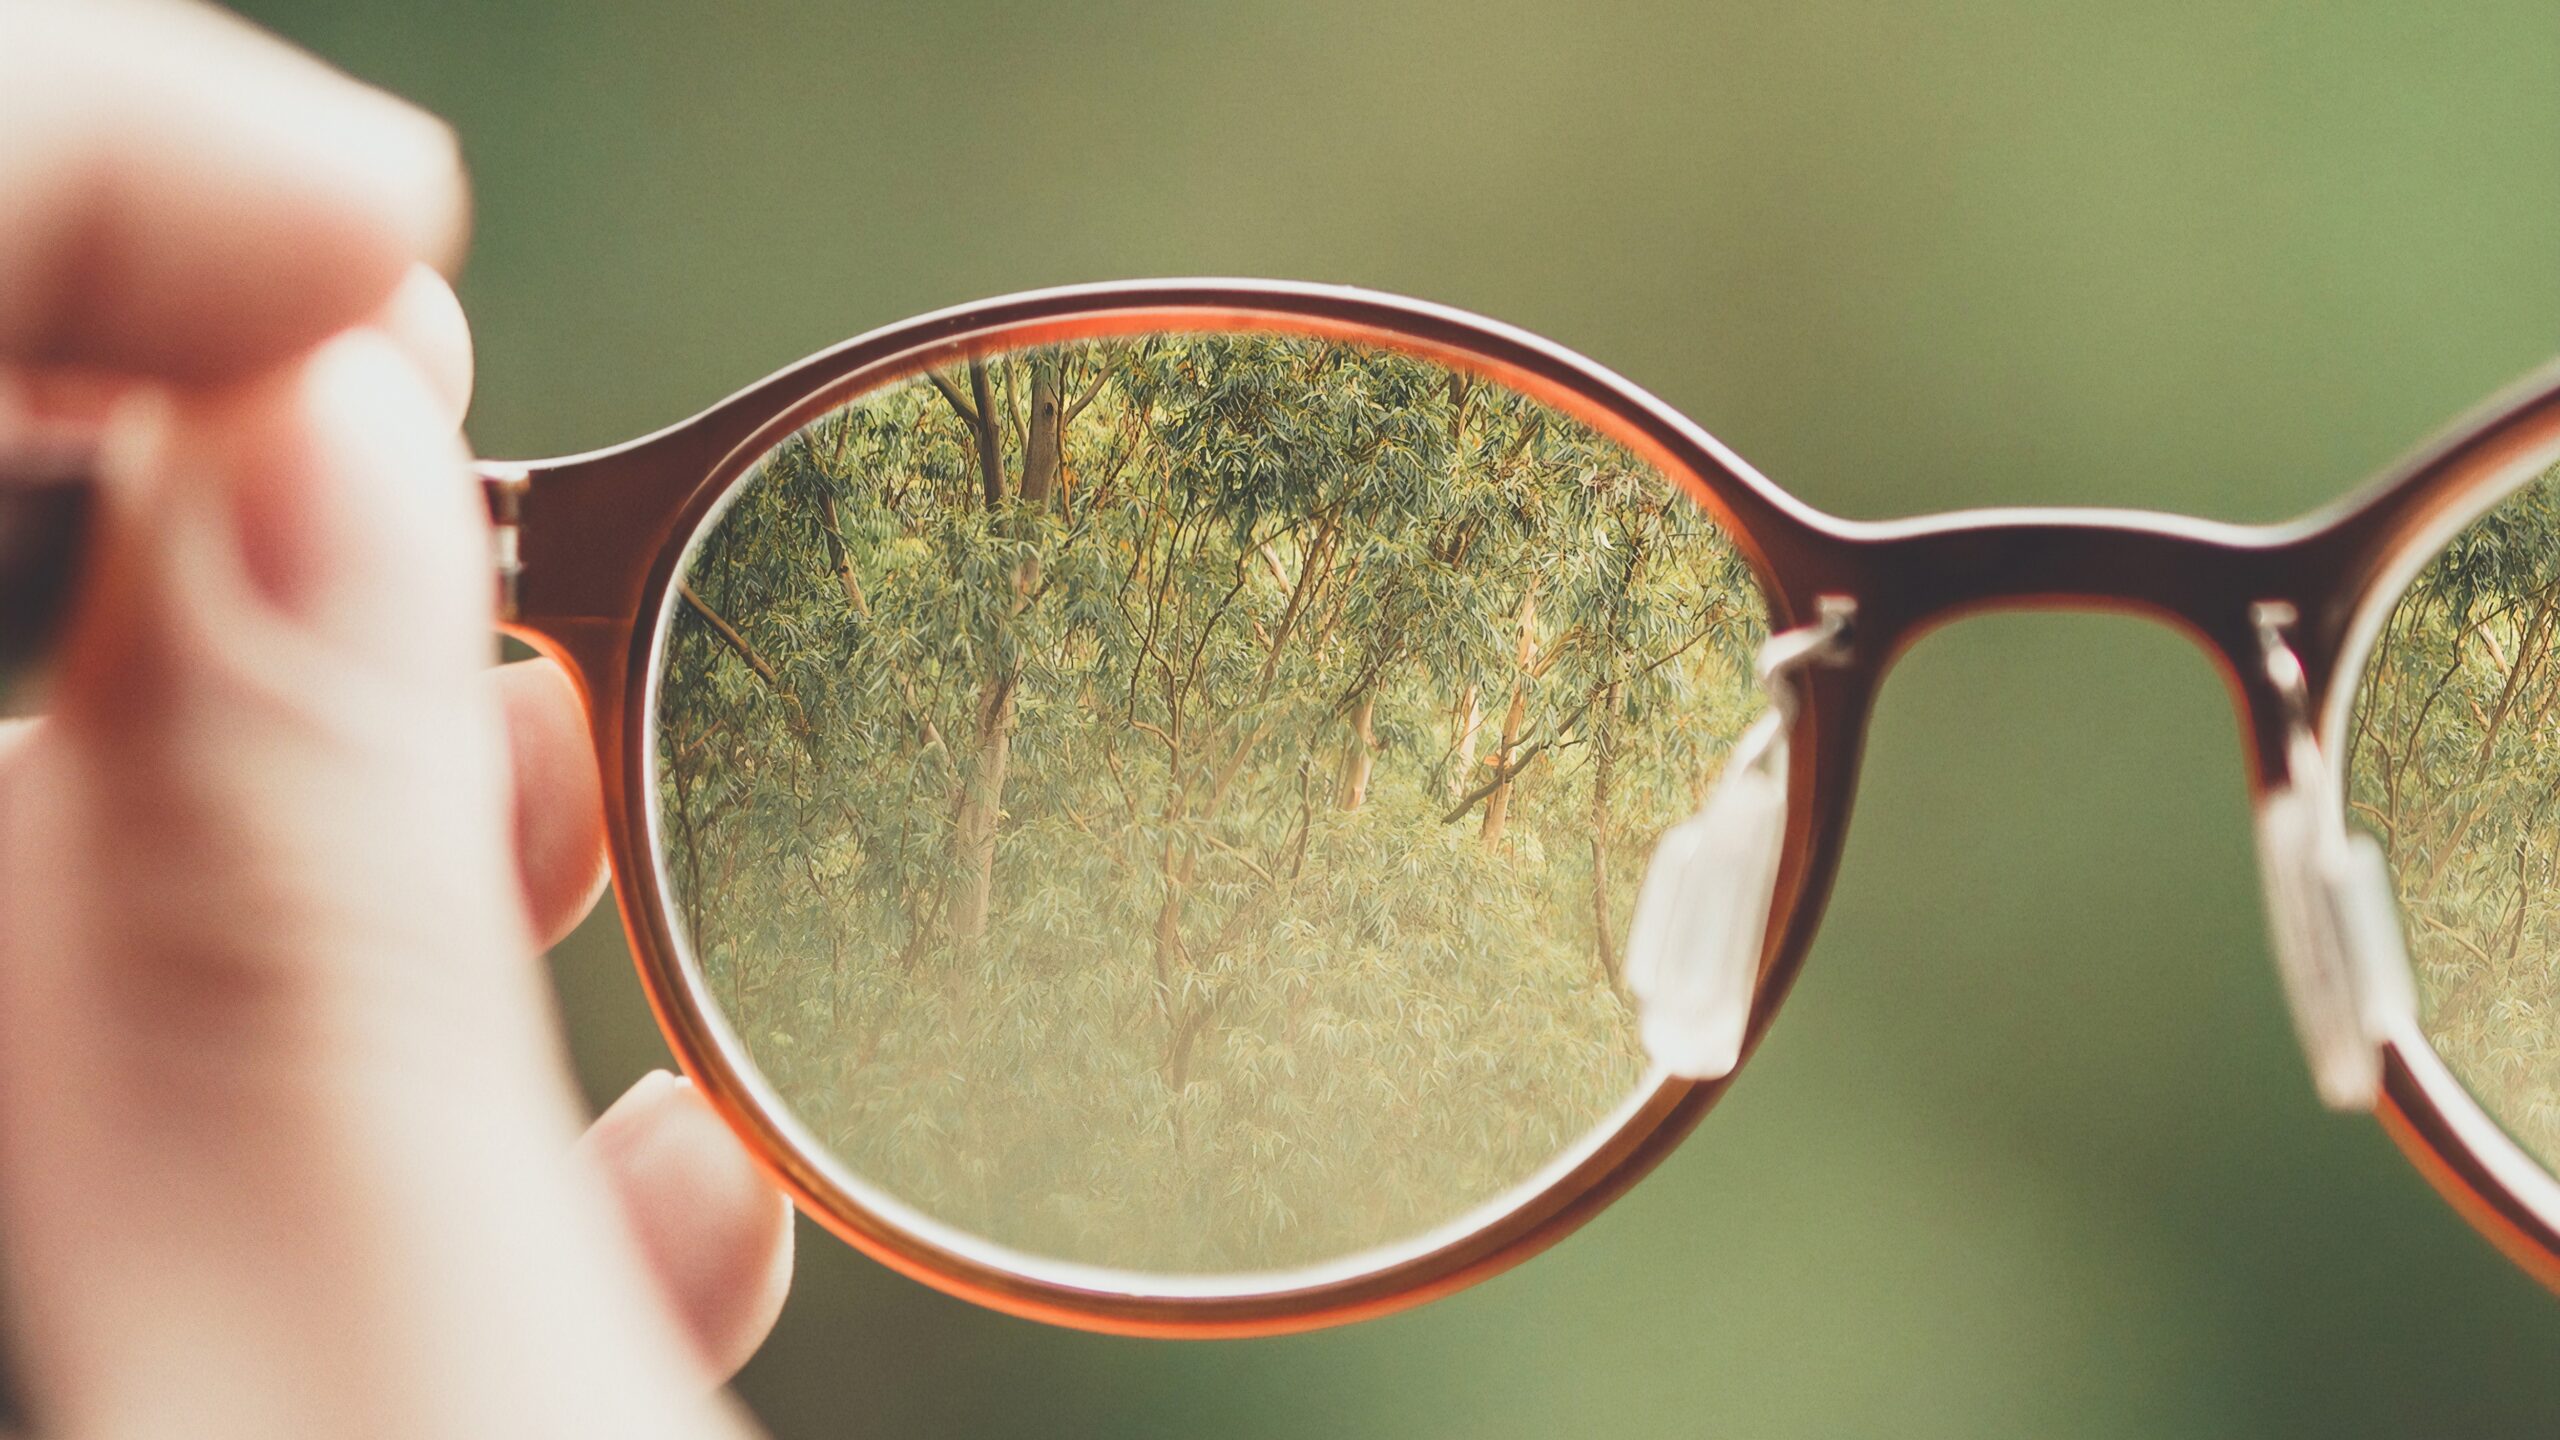 A pair of eyeglasses being held up, reflecting a forest through the lens